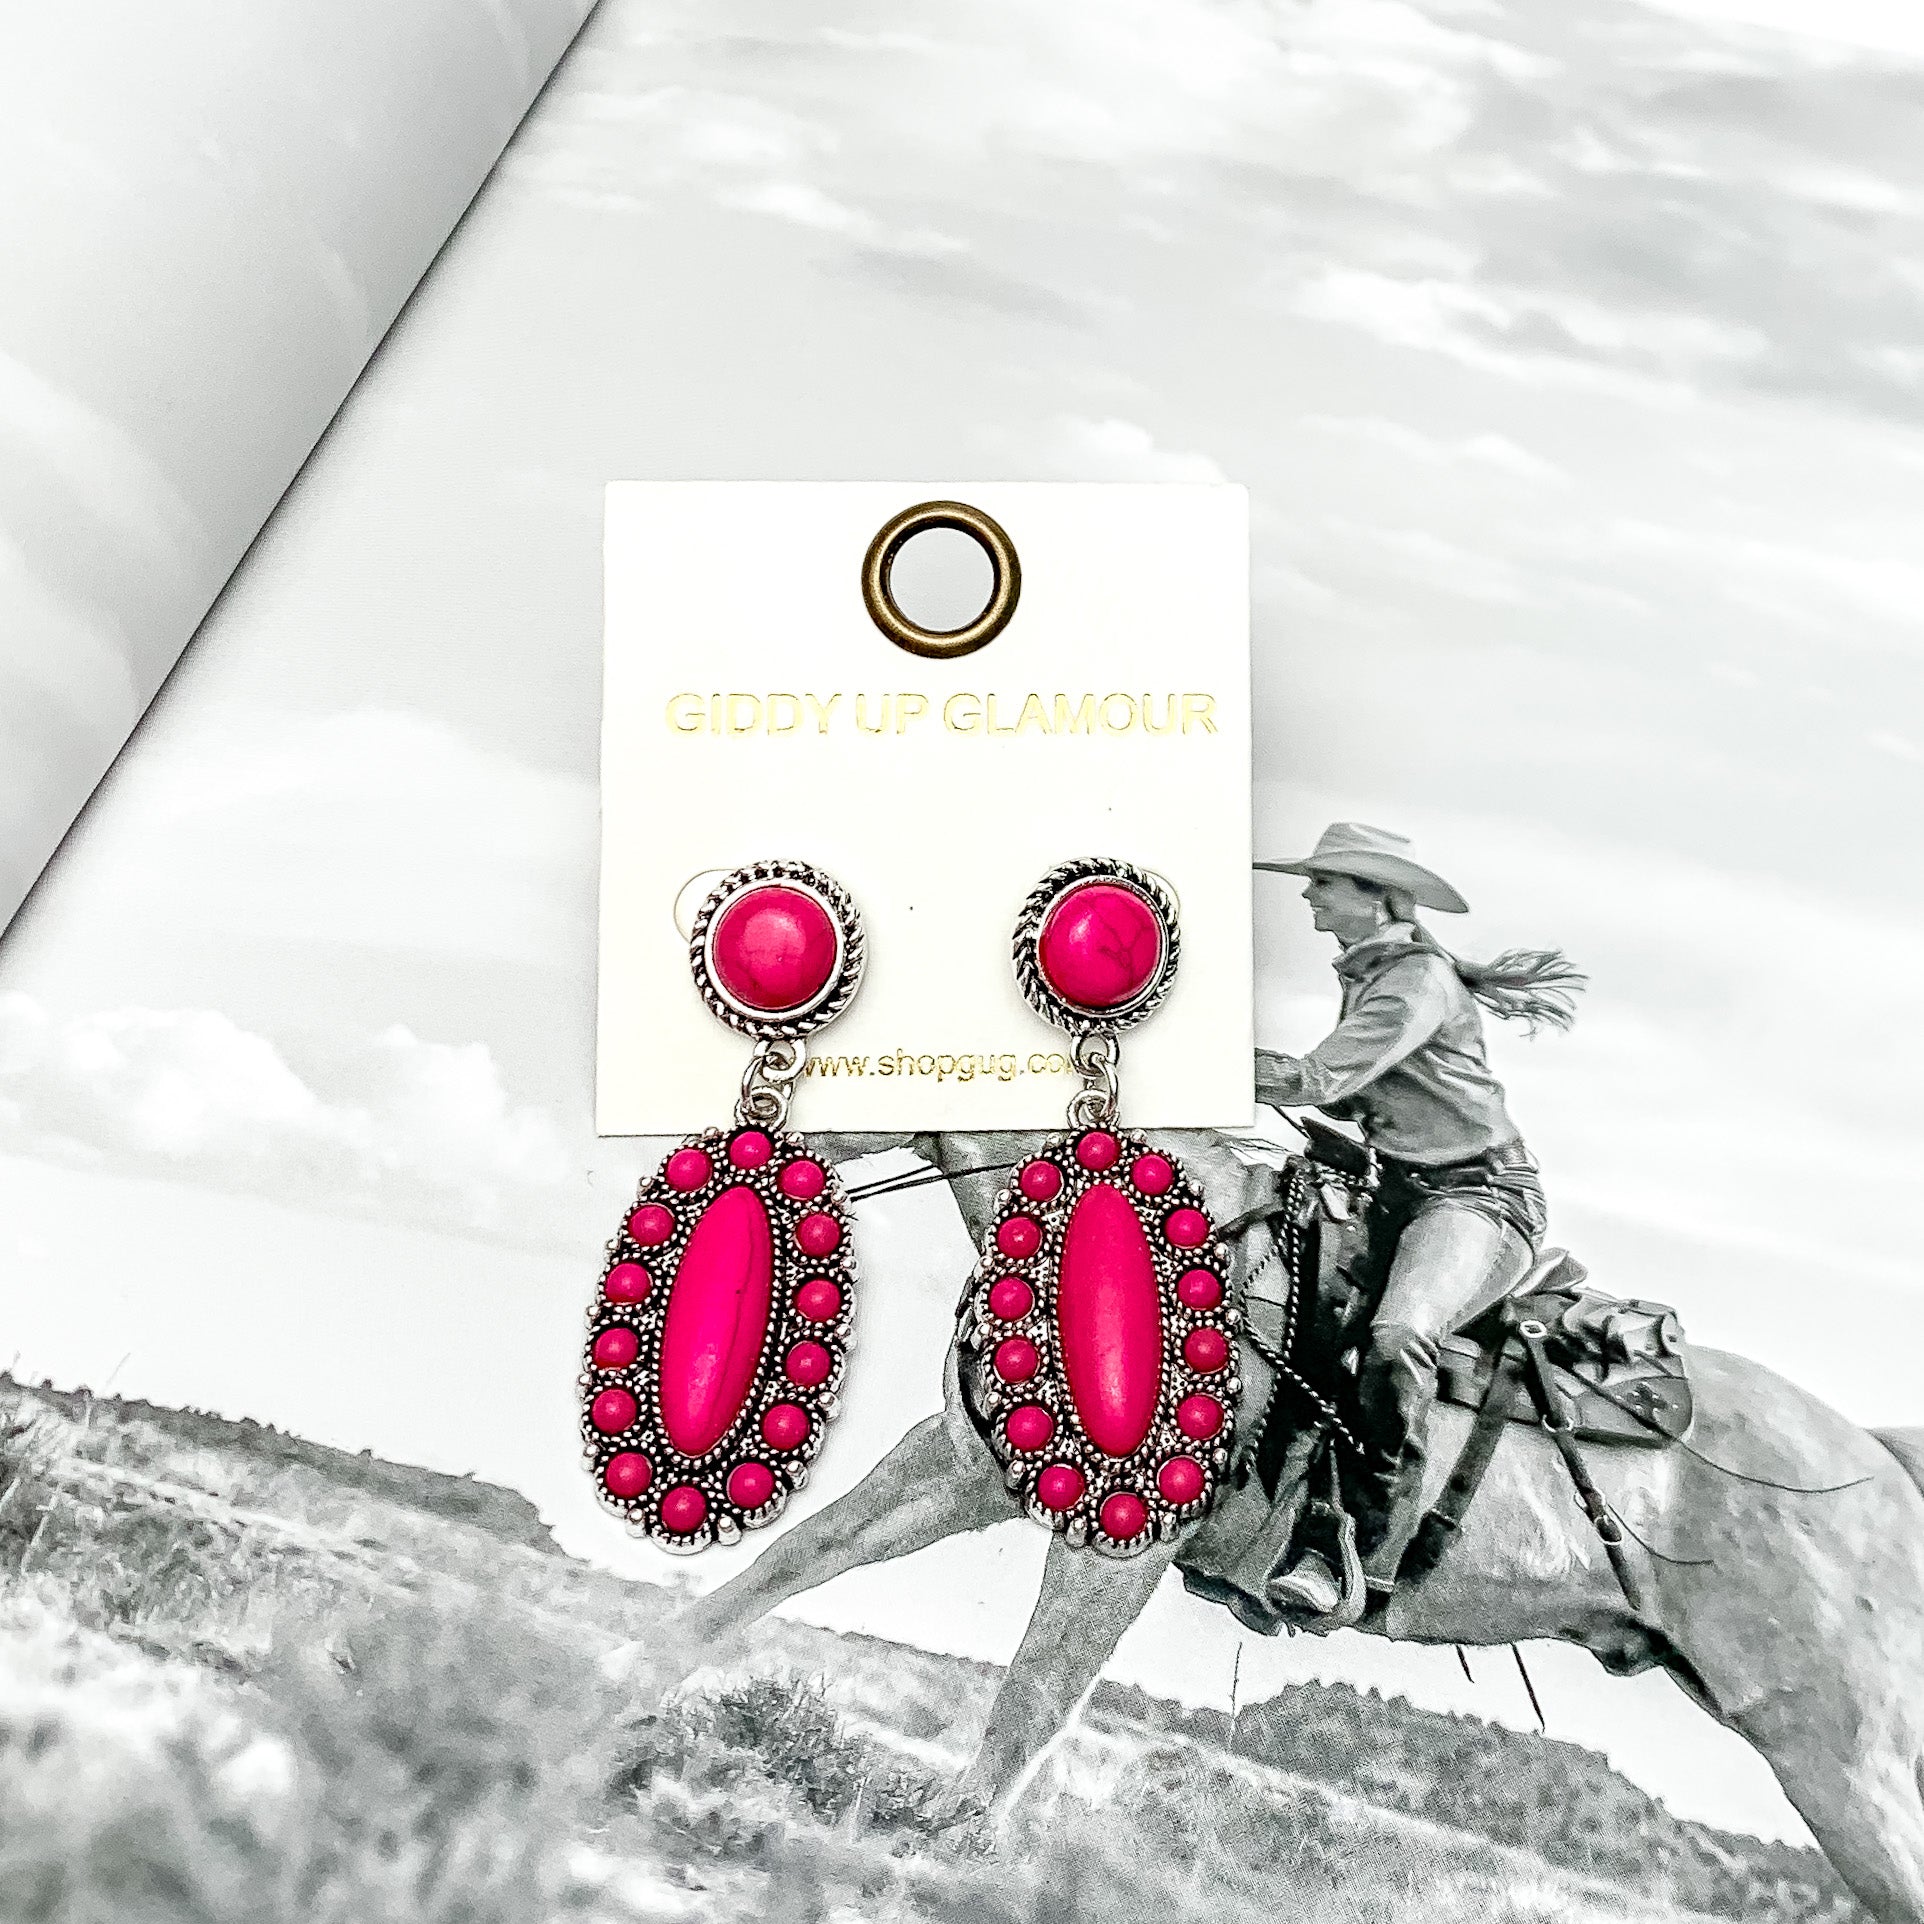 Circle Post Earrings with Oval Cluster and Stones in Hot Pink. Pictured on a book with a western background.